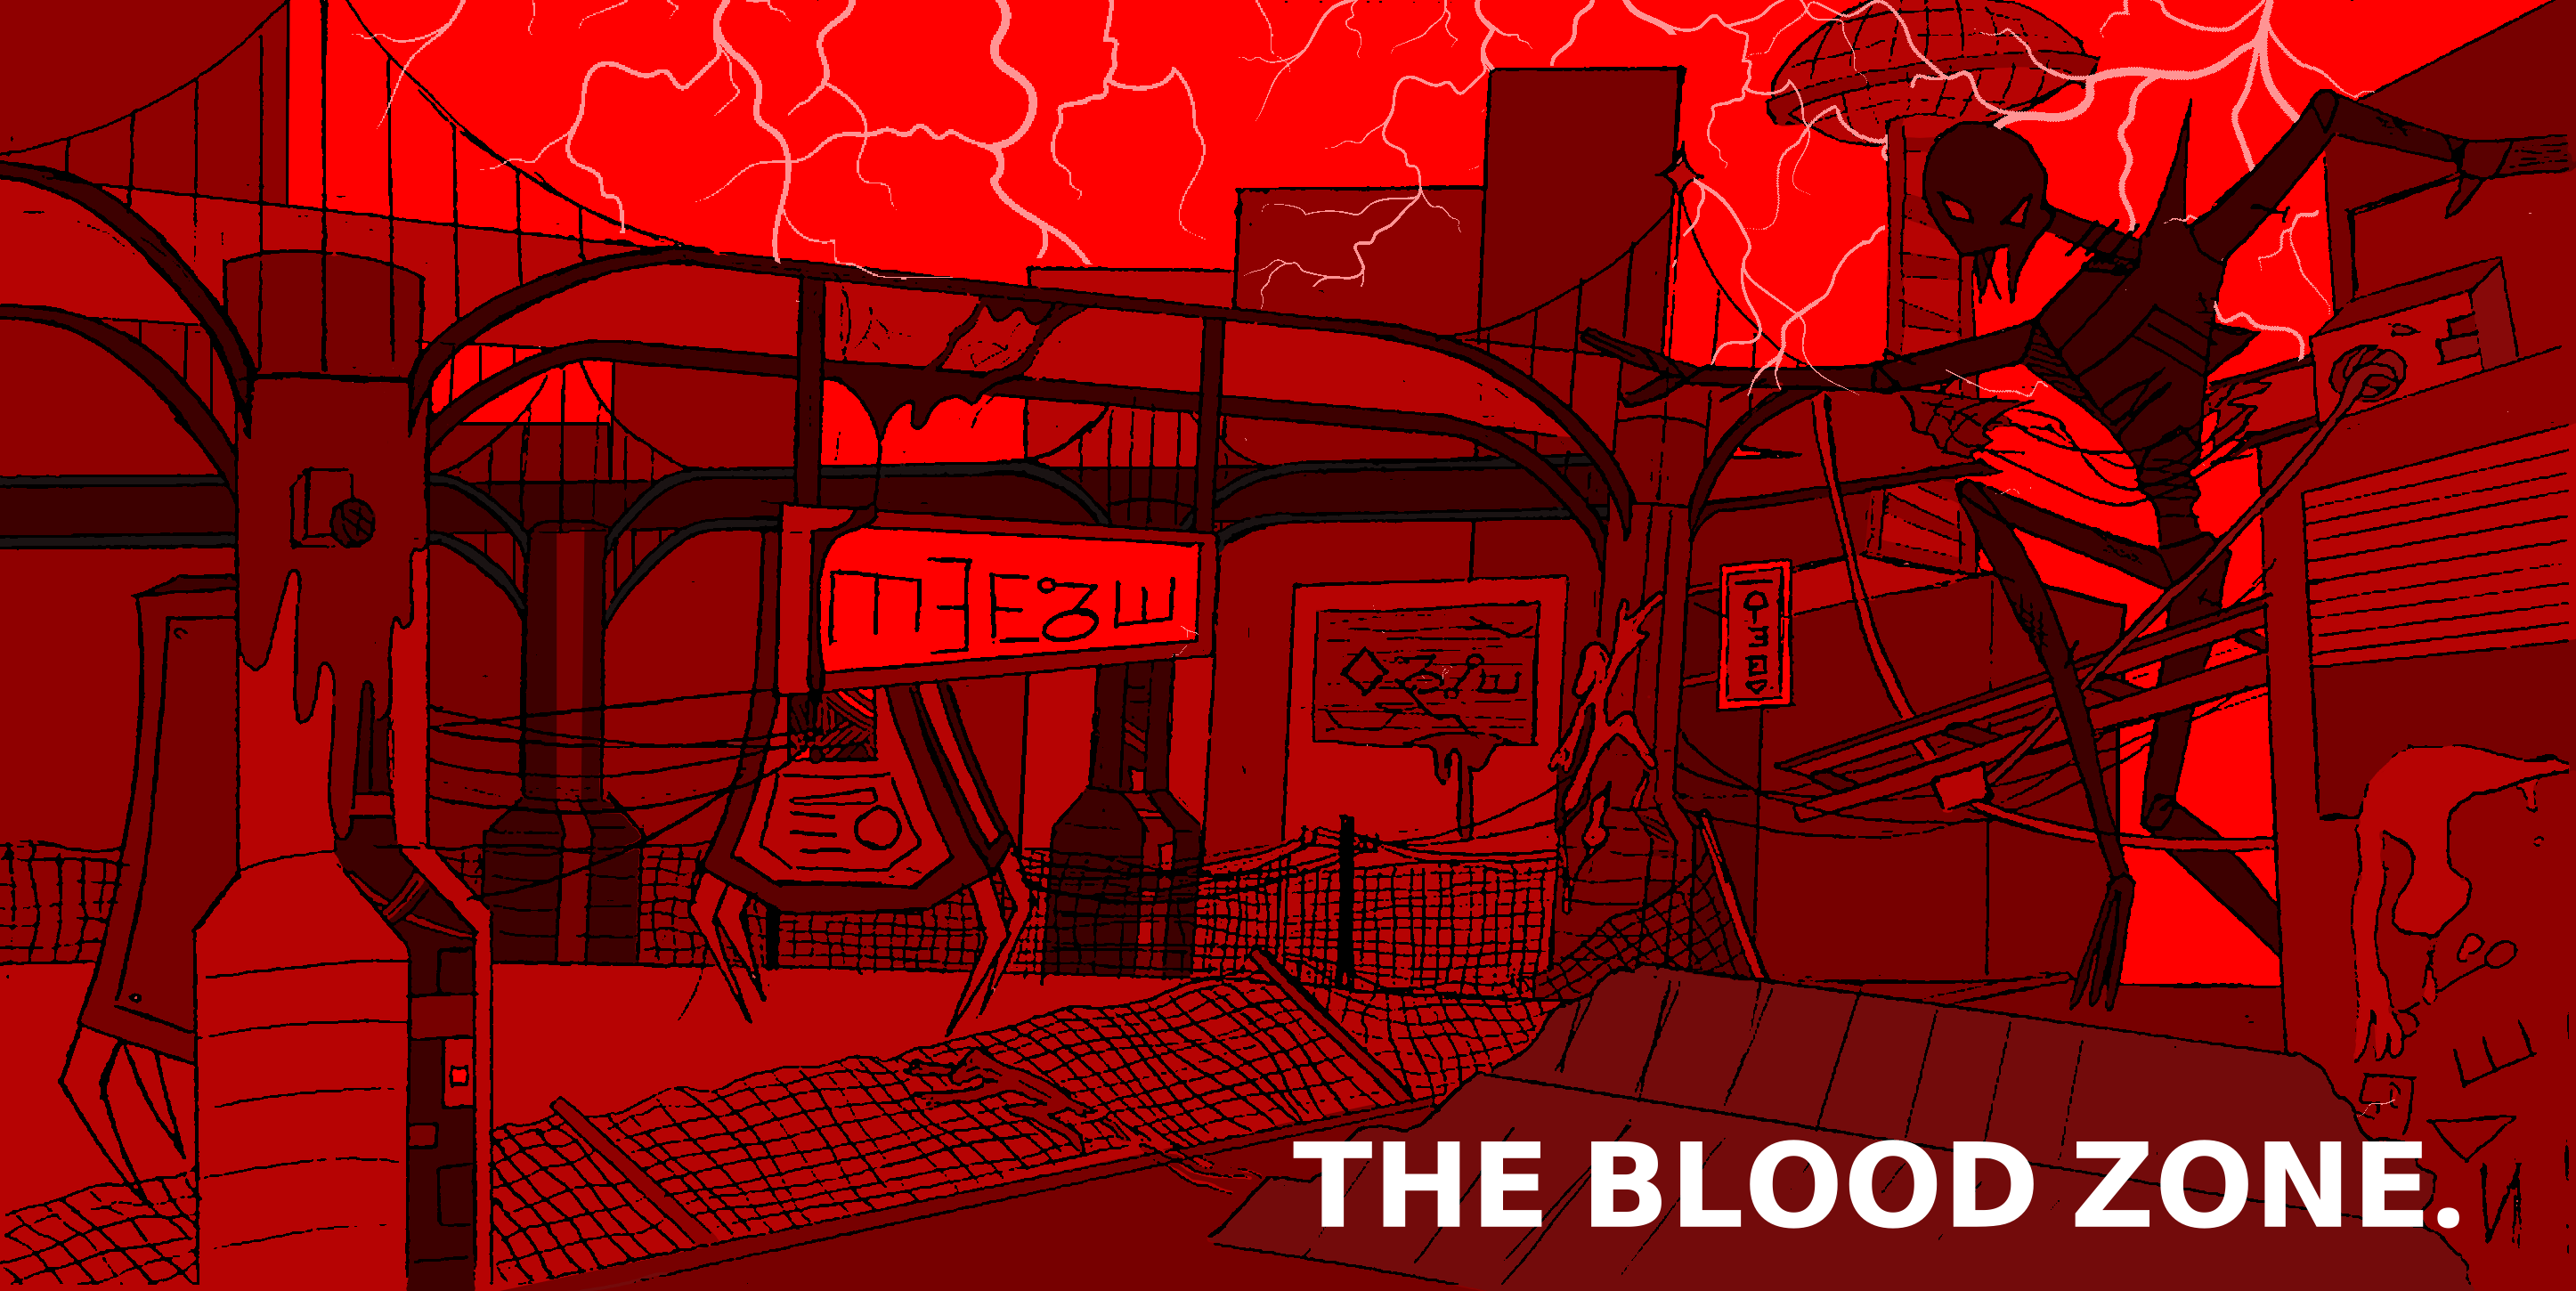 THE BLOOD ZONE.